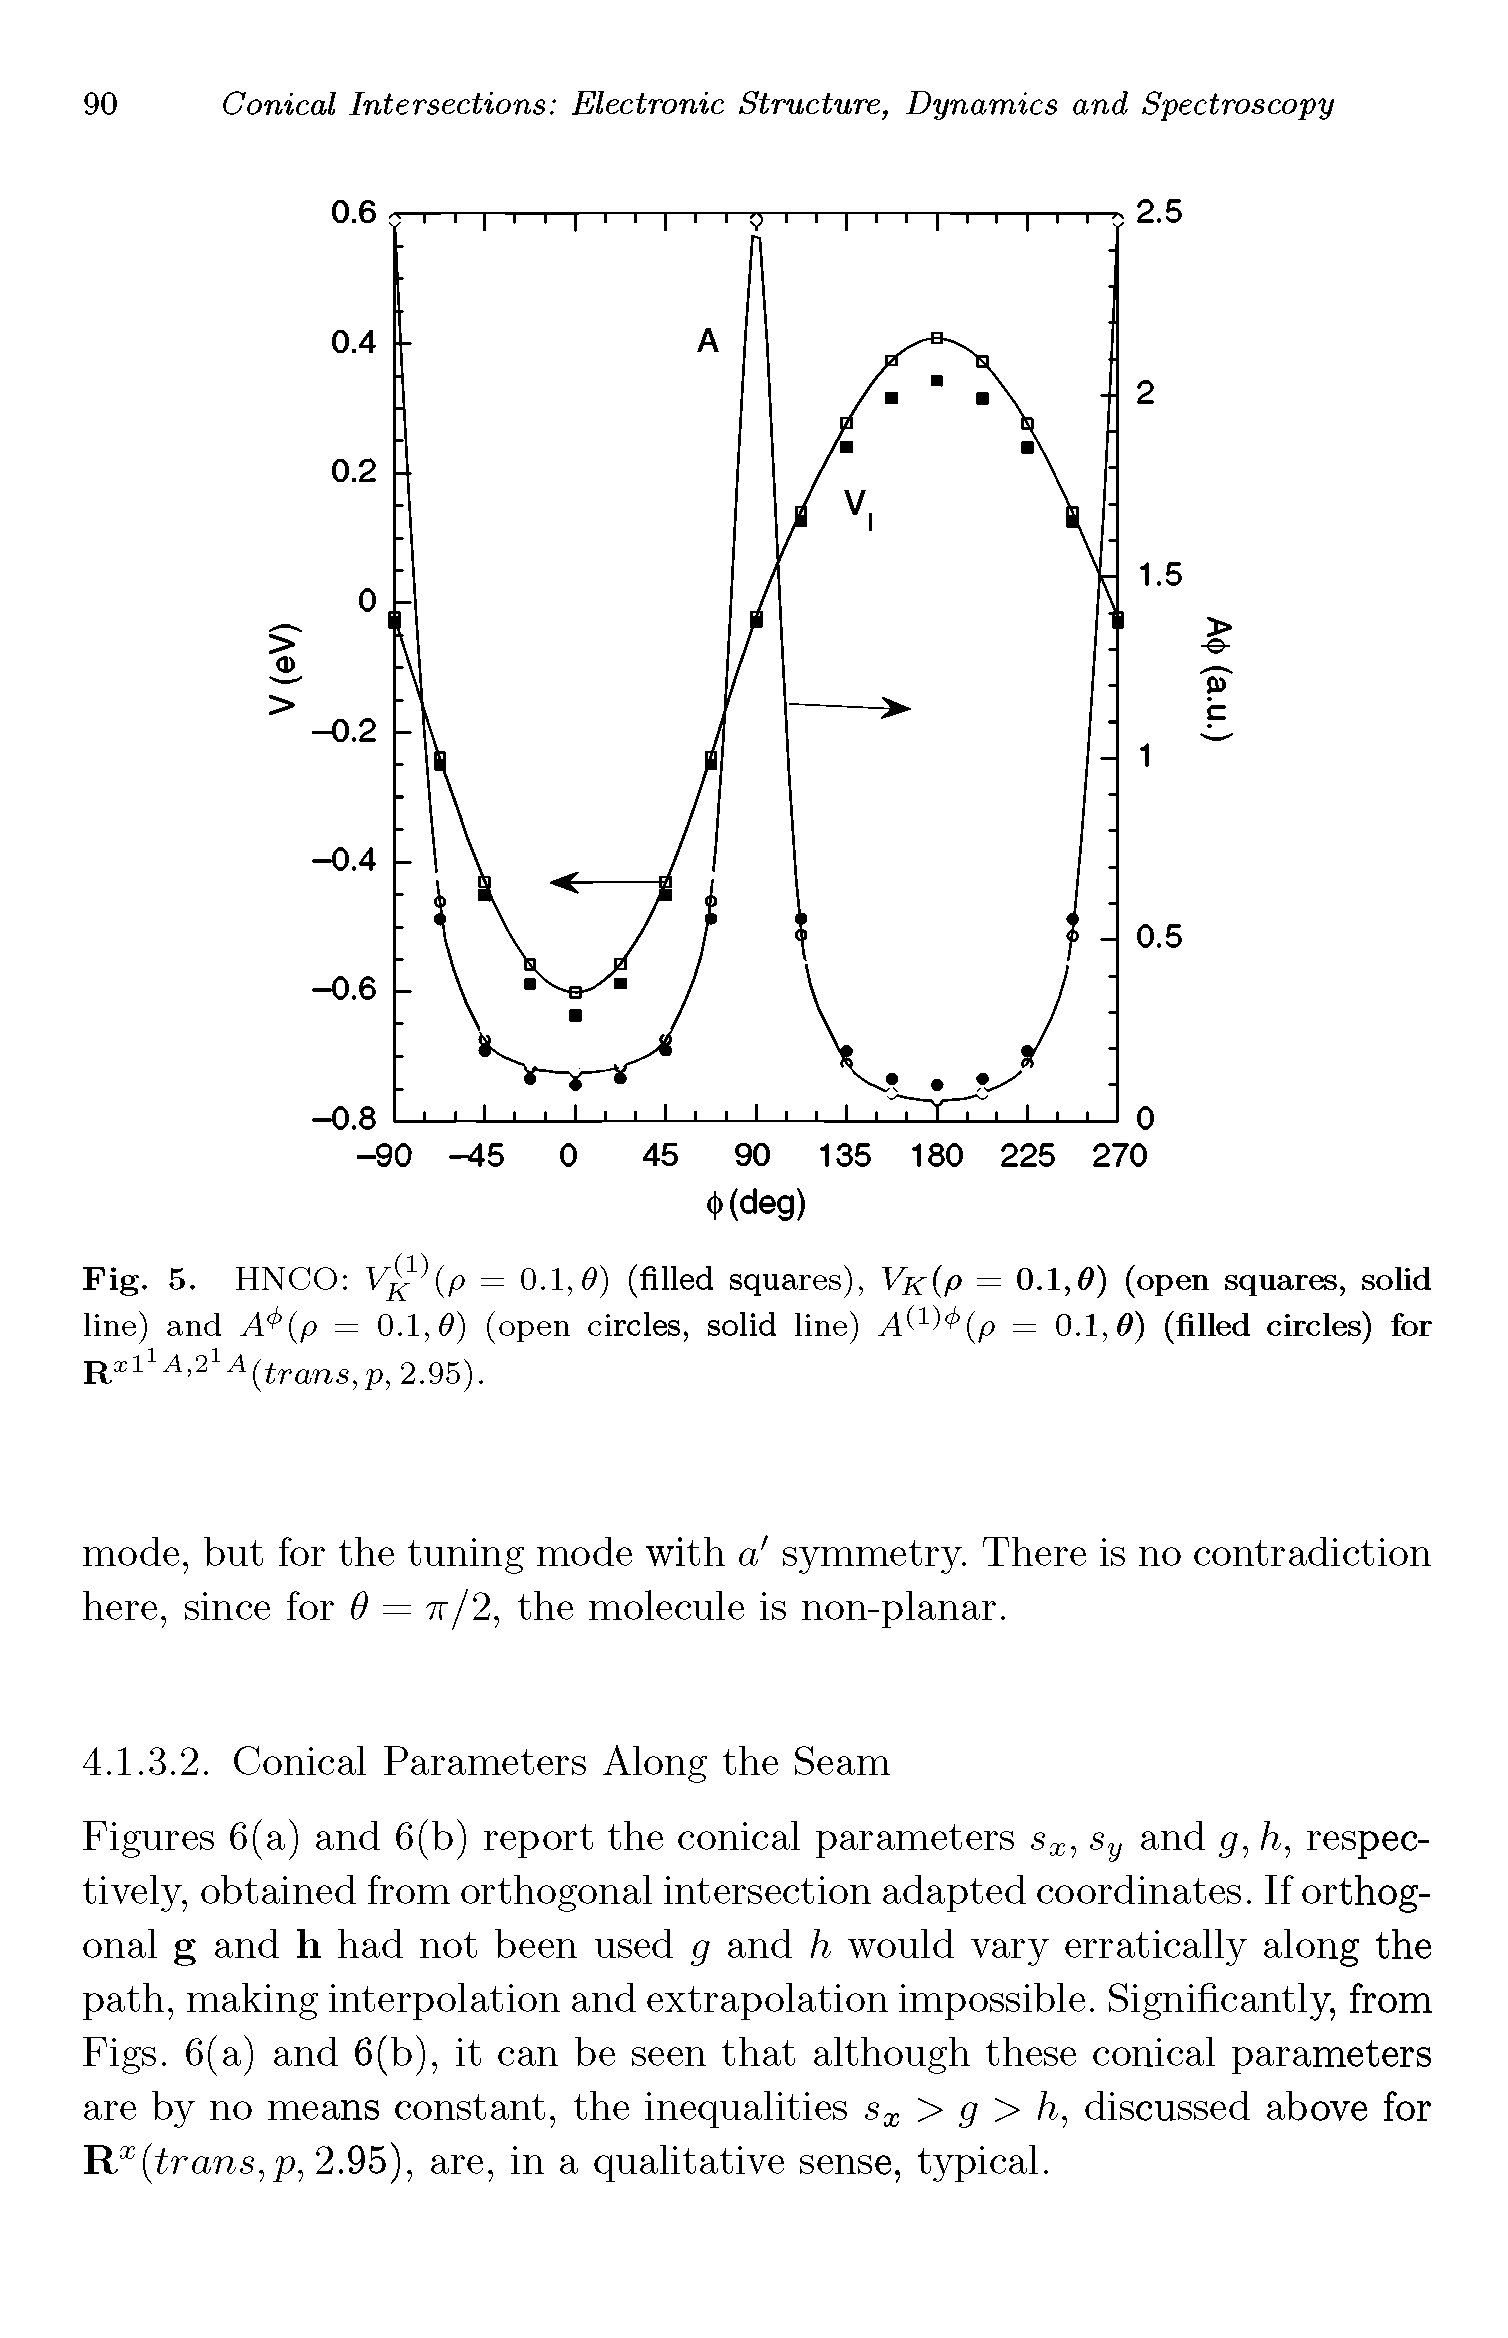 Figures 6(a) and 6(b) report the conical parameters Sy and g, h, respectively, obtained from orthogonal intersection adapted coordinates. If orthogonal g and h had not been used g and h would vary erratically along the path, making interpolation and extrapolation impossible. Significantly, from Figs. 6(a) and 6(b), it can be seen that although these conical parameters are by no means constant, the inequalities > g > h, discussed above for Tl trans,p, 2.95), are, in a qualitative sense, typical.